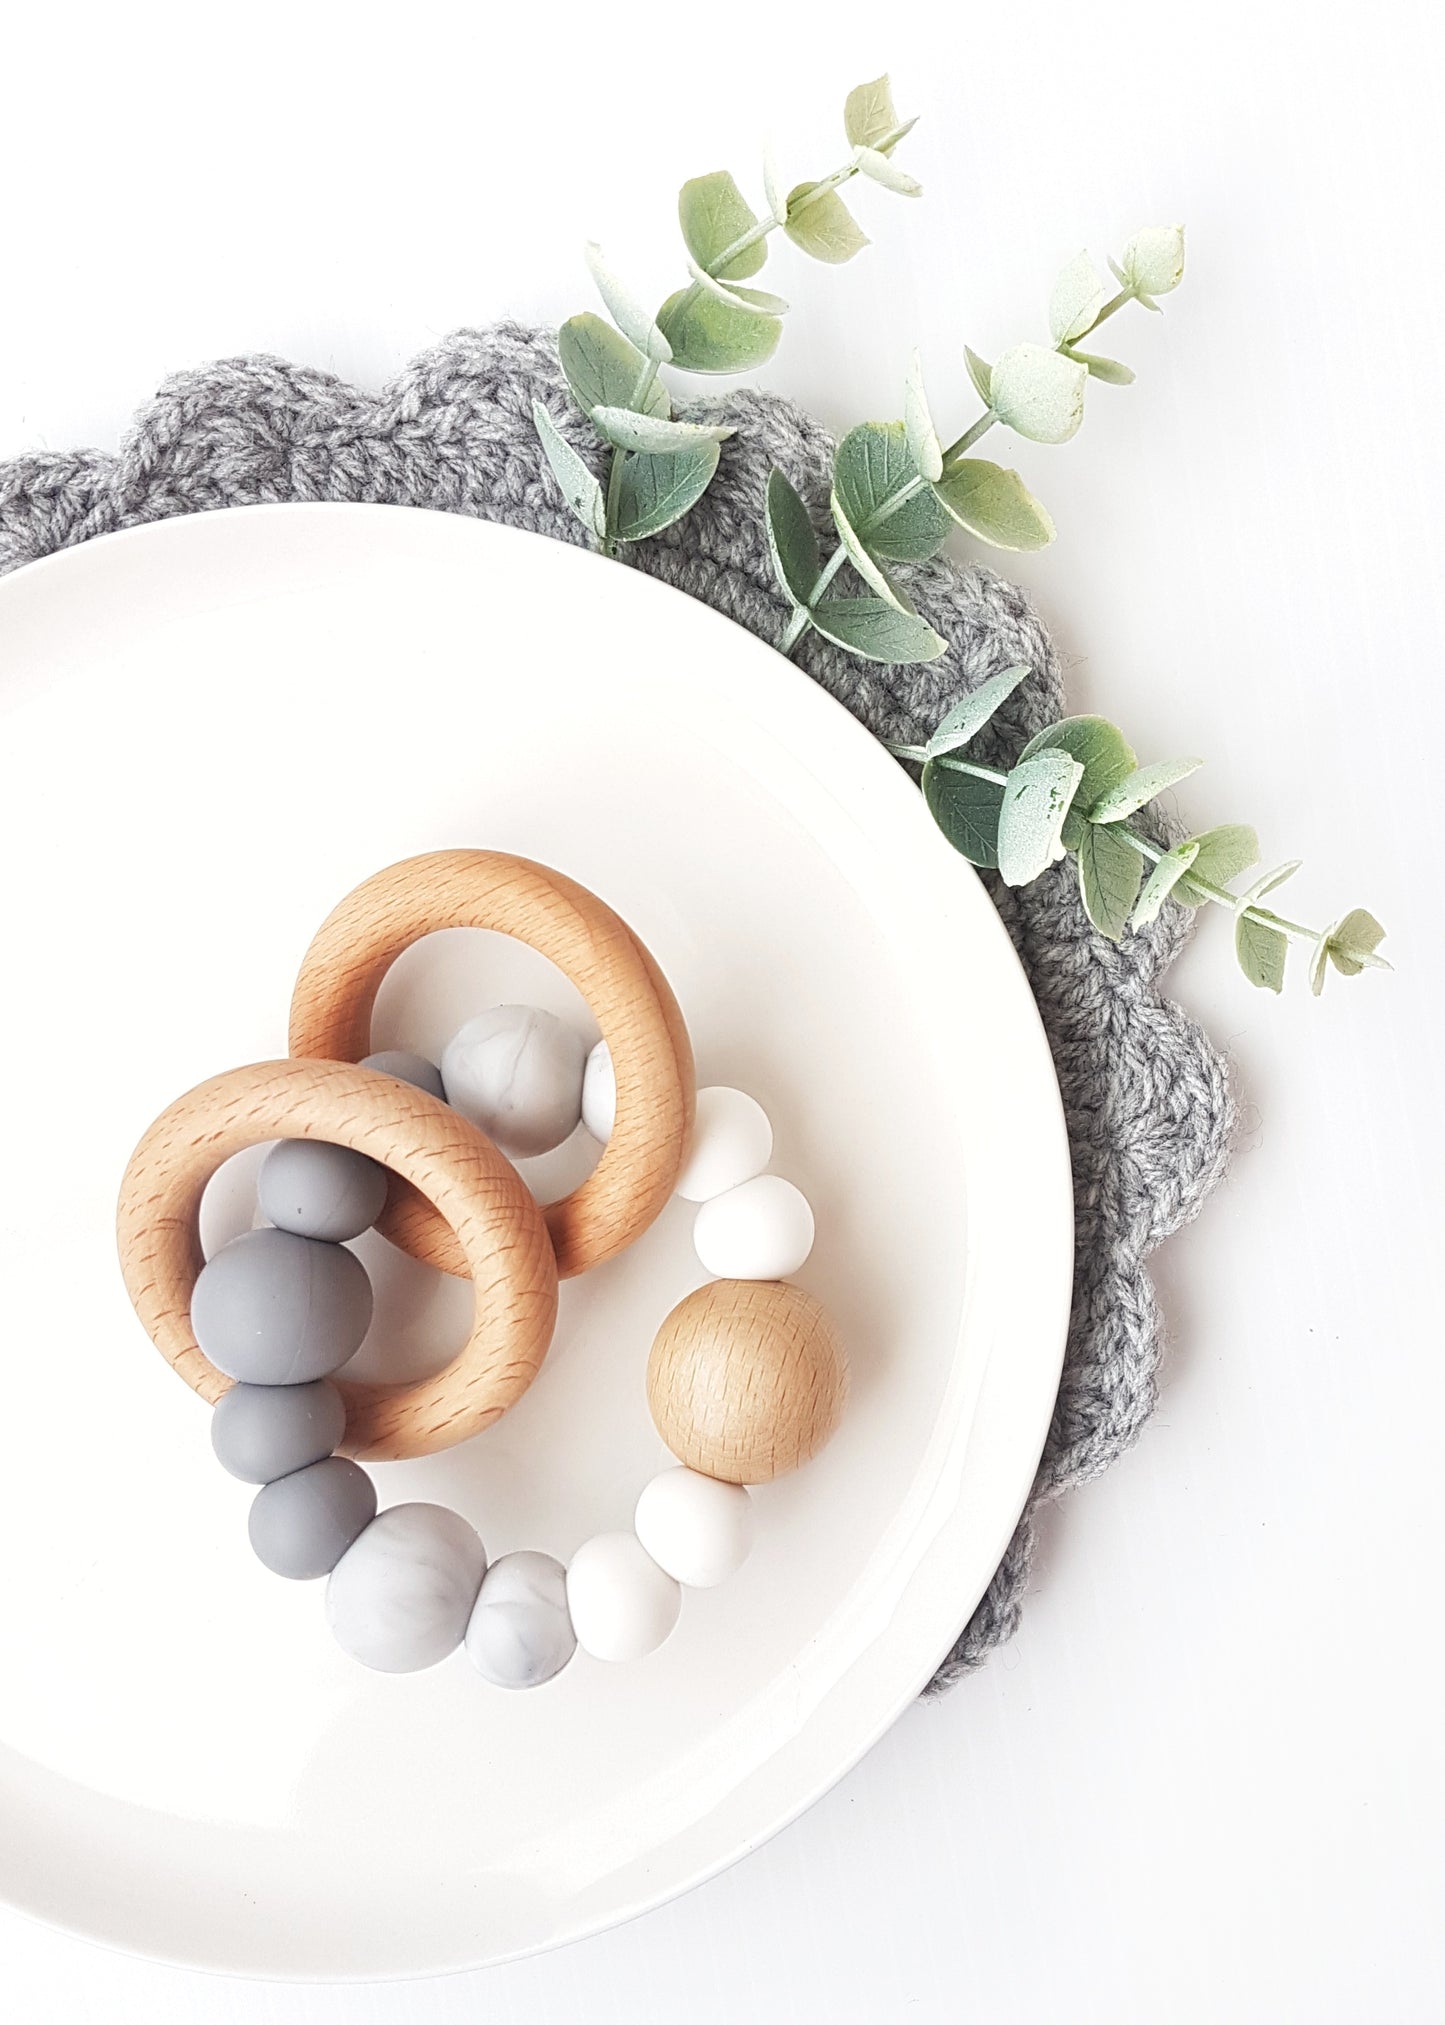 Made from gorgeous Beech timber and soft, Marbled grey Bpa-free silicone, these teething toys have been designed to soothe sore teething gums and encourage healthy fine motor skills development and brain function - Dreamer Marble Teething Toy - Bowerbird Creations